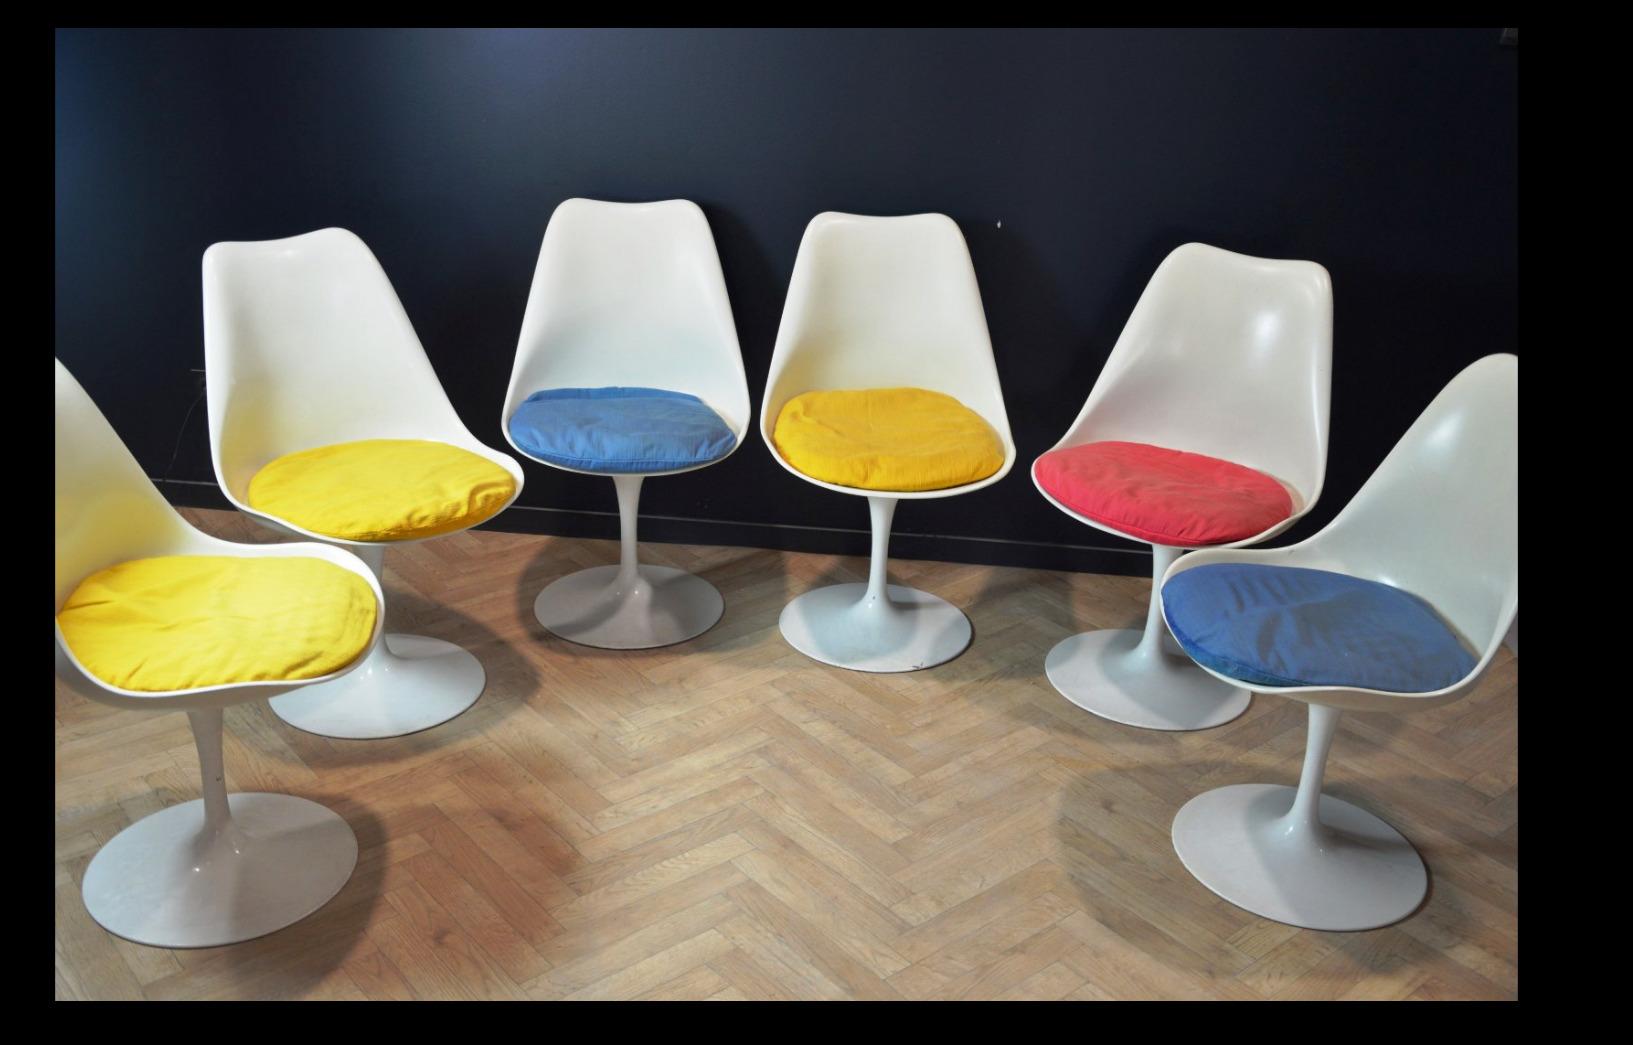 Eero Saarinen (1910-1961) et Edition Knoll
Set of 6 swiveling tulip chairs
6 chaises modèle tulipe
Brightness and repainted on feet
On request re-upholstery is possible in any kind of leather or fabric of your choice.
This original early tulip